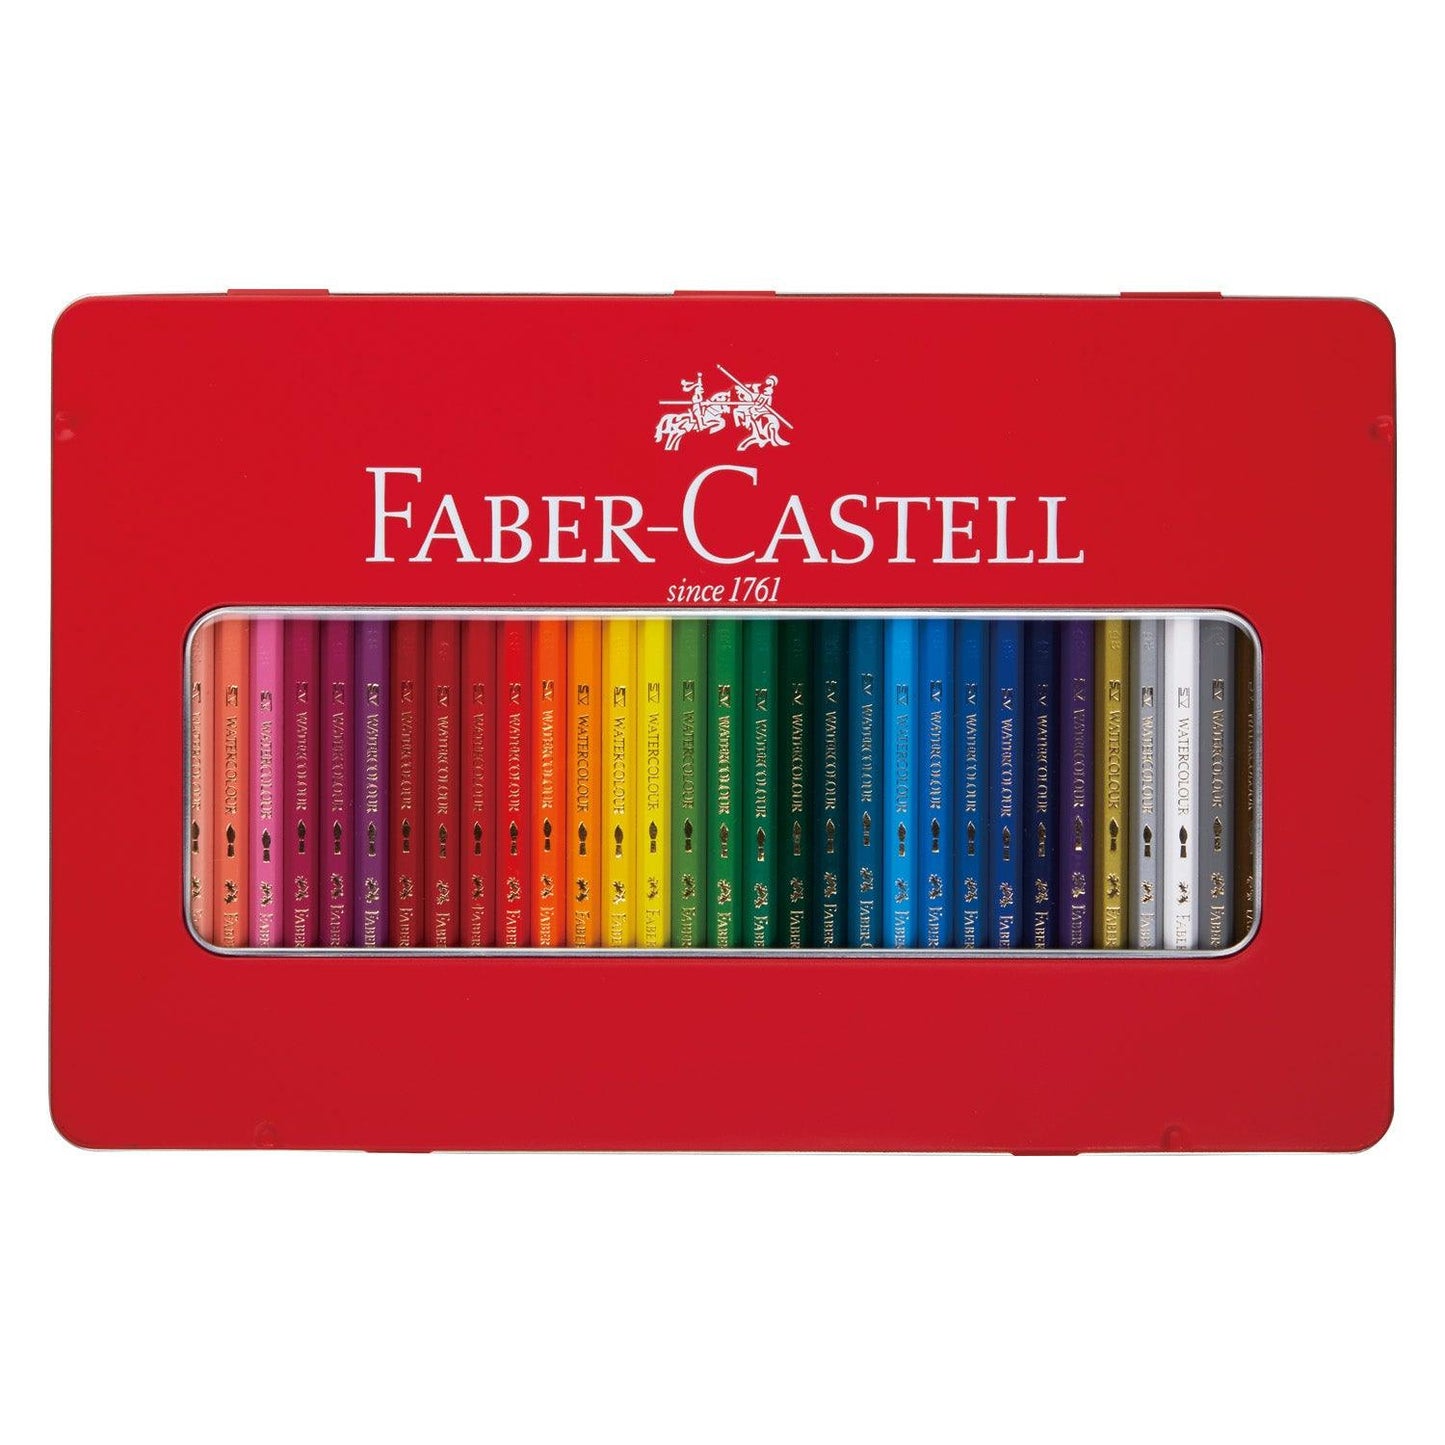 A set of Faber Castell thick quality markers Charkov art and craft boutique